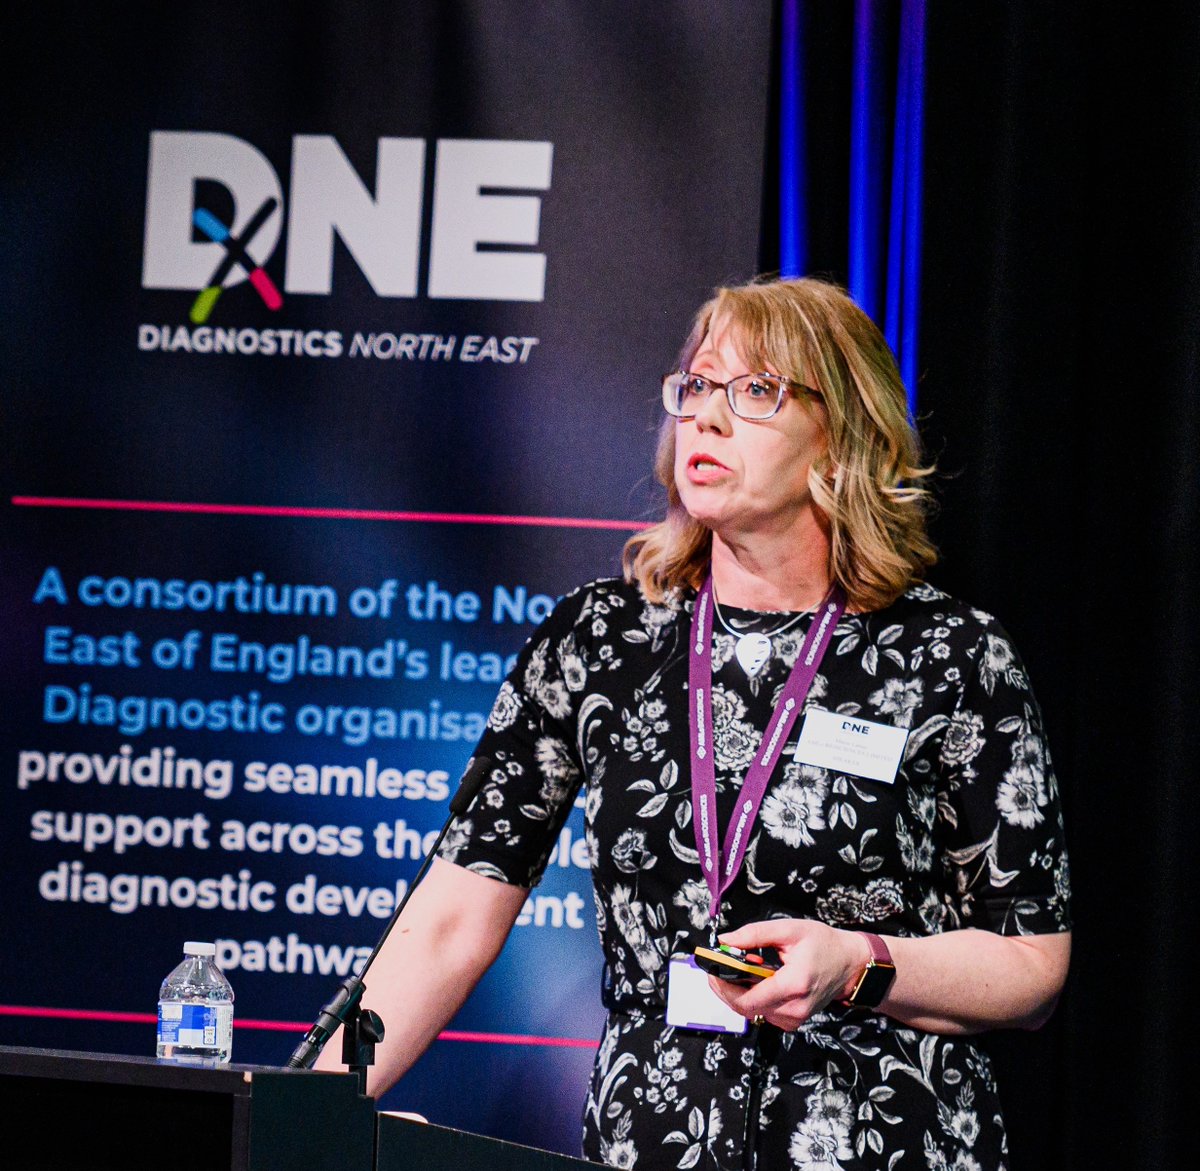 “Through key partnerships we can maximise the availability of our diagnostic test for #melanoma.” 
@marie_labus presented on the power of #collaboration in product development, with Claire Jones @novopathNCL at @DiagnosticsNE annual conference.
#DxNEConf23
bit.ly/3nrHS6N